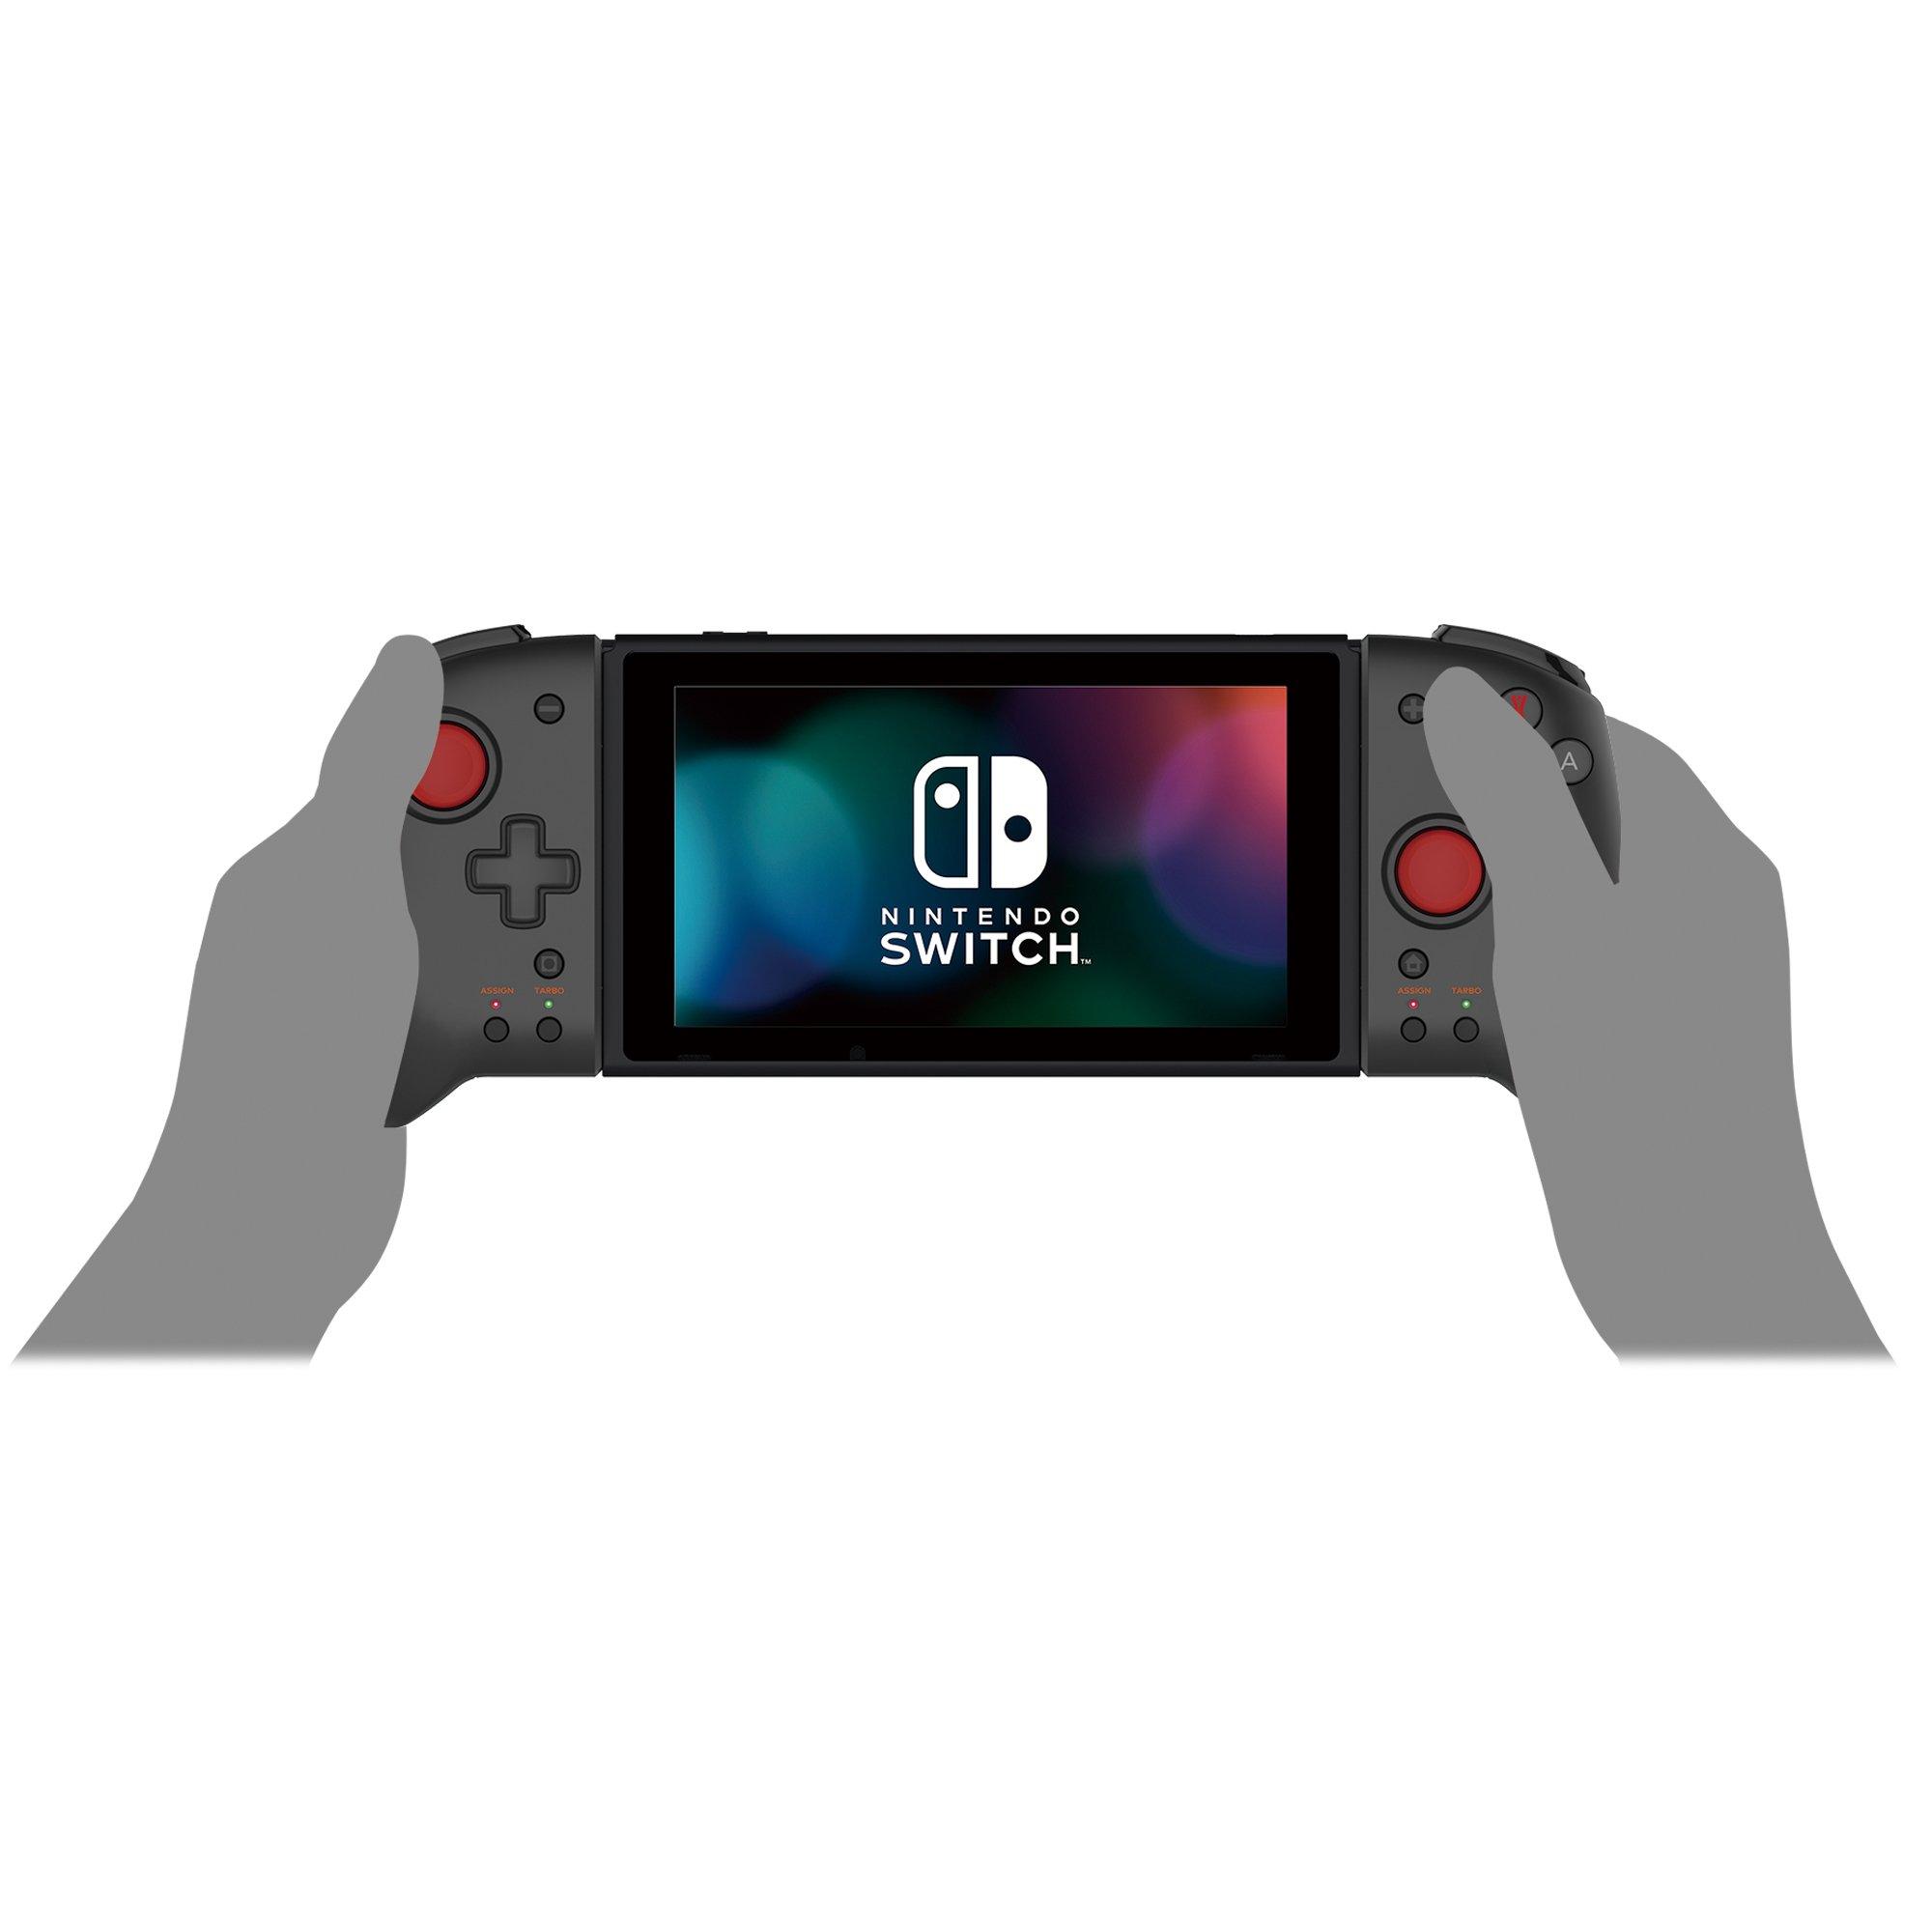 Hori Split Pad Pro Review: The Ultimate Nintendo Switch Controller